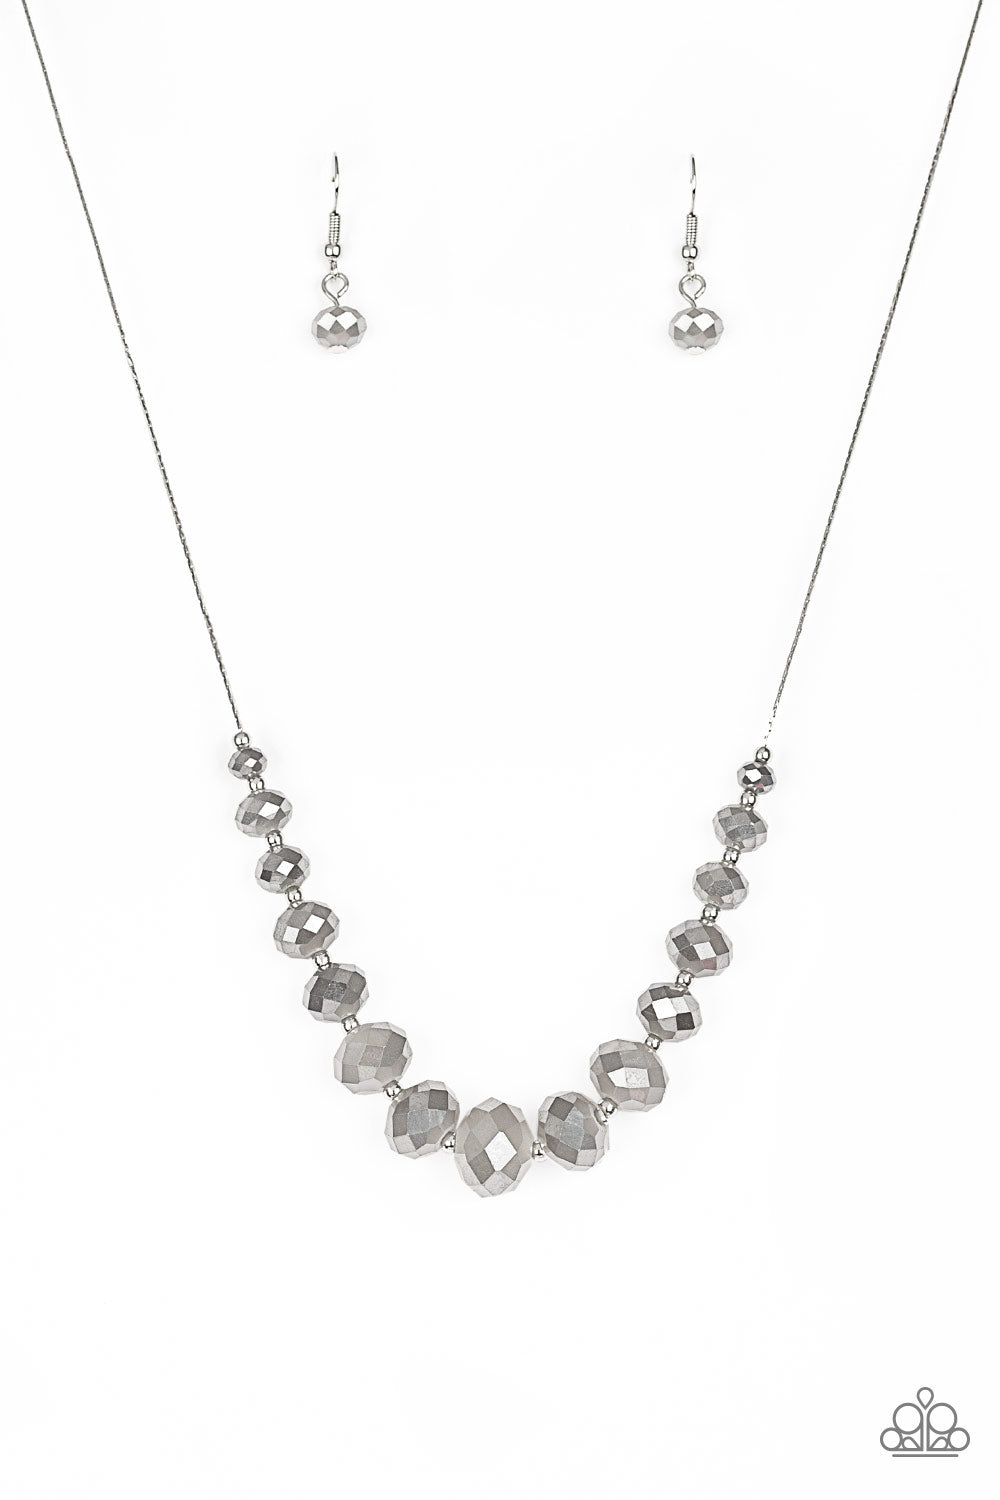 Crystal Carriages - Silver Item #N746 Brushed in a metallic finish, iridescent crystal-like beads and dainty silver beads are threaded along a flat silver chain below the collar. The sparkling crystal-like beads gradually increase in size near the center for a refined finish. Features an adjustable clasp closure. All Paparazzi Accessories are lead free and nickel free!  Sold as one individual necklace. Includes one pair of matching earrings.